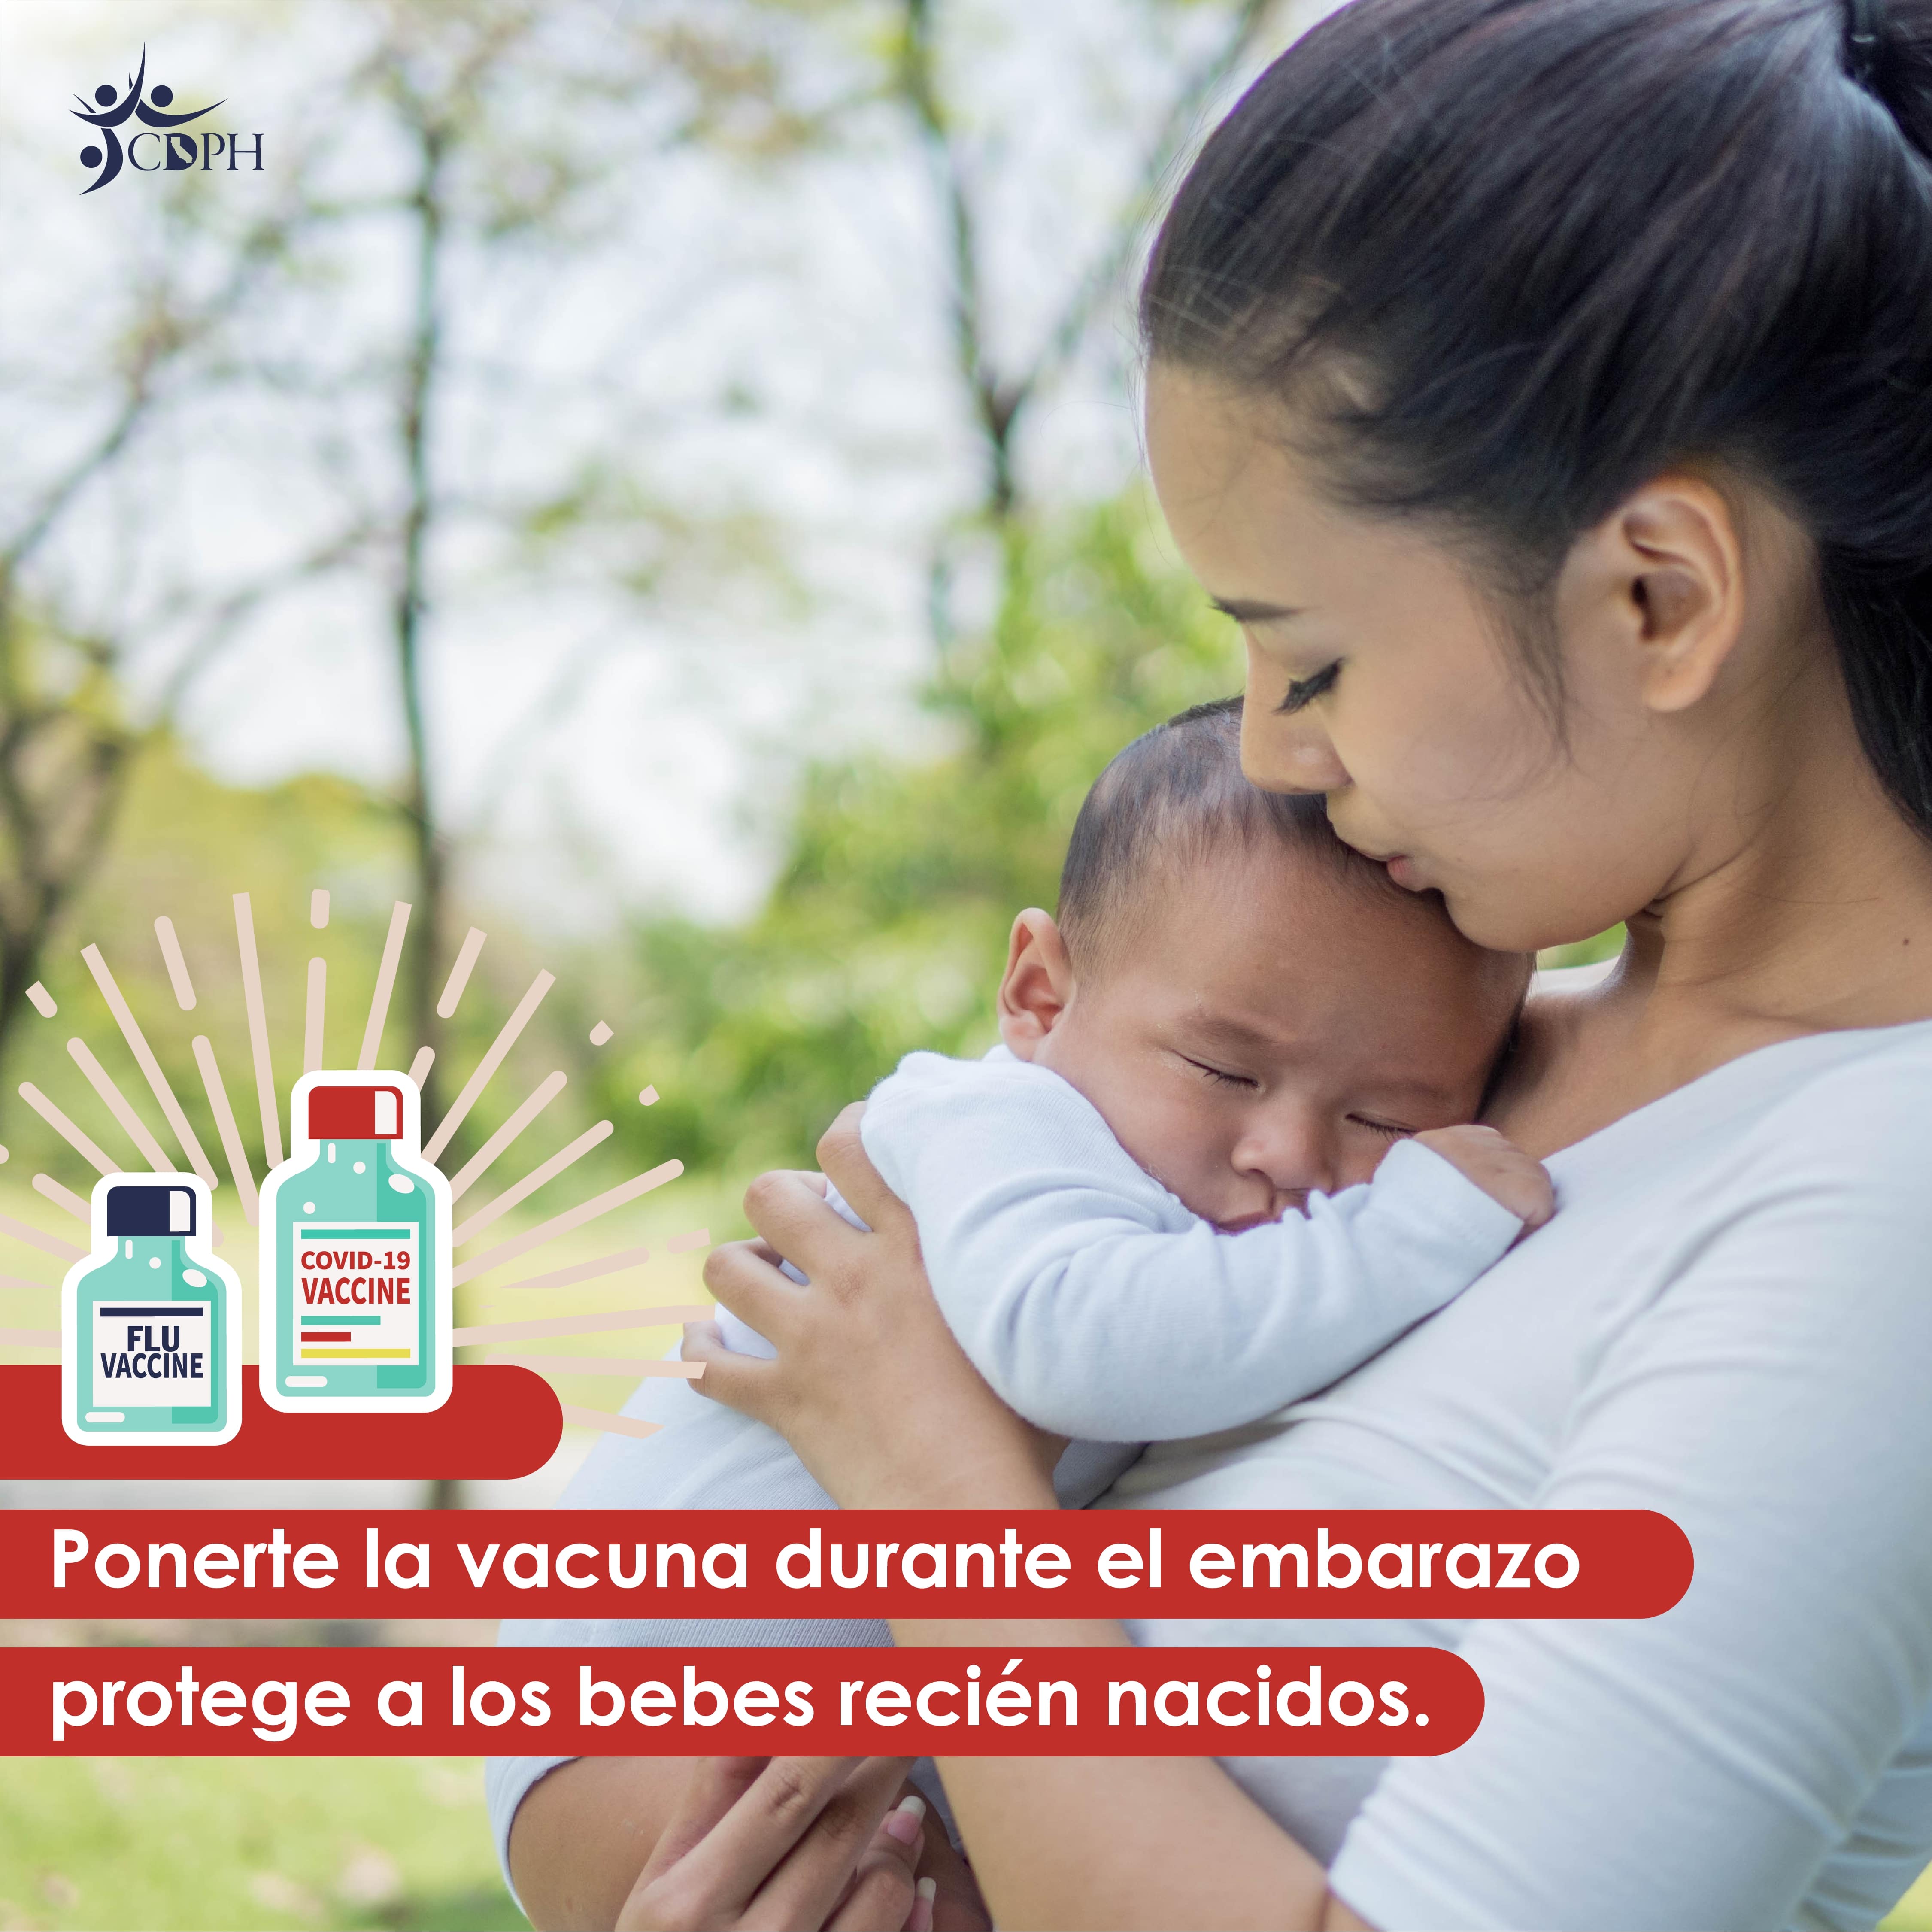 Vaccination during pregnancy protects newborn babies.